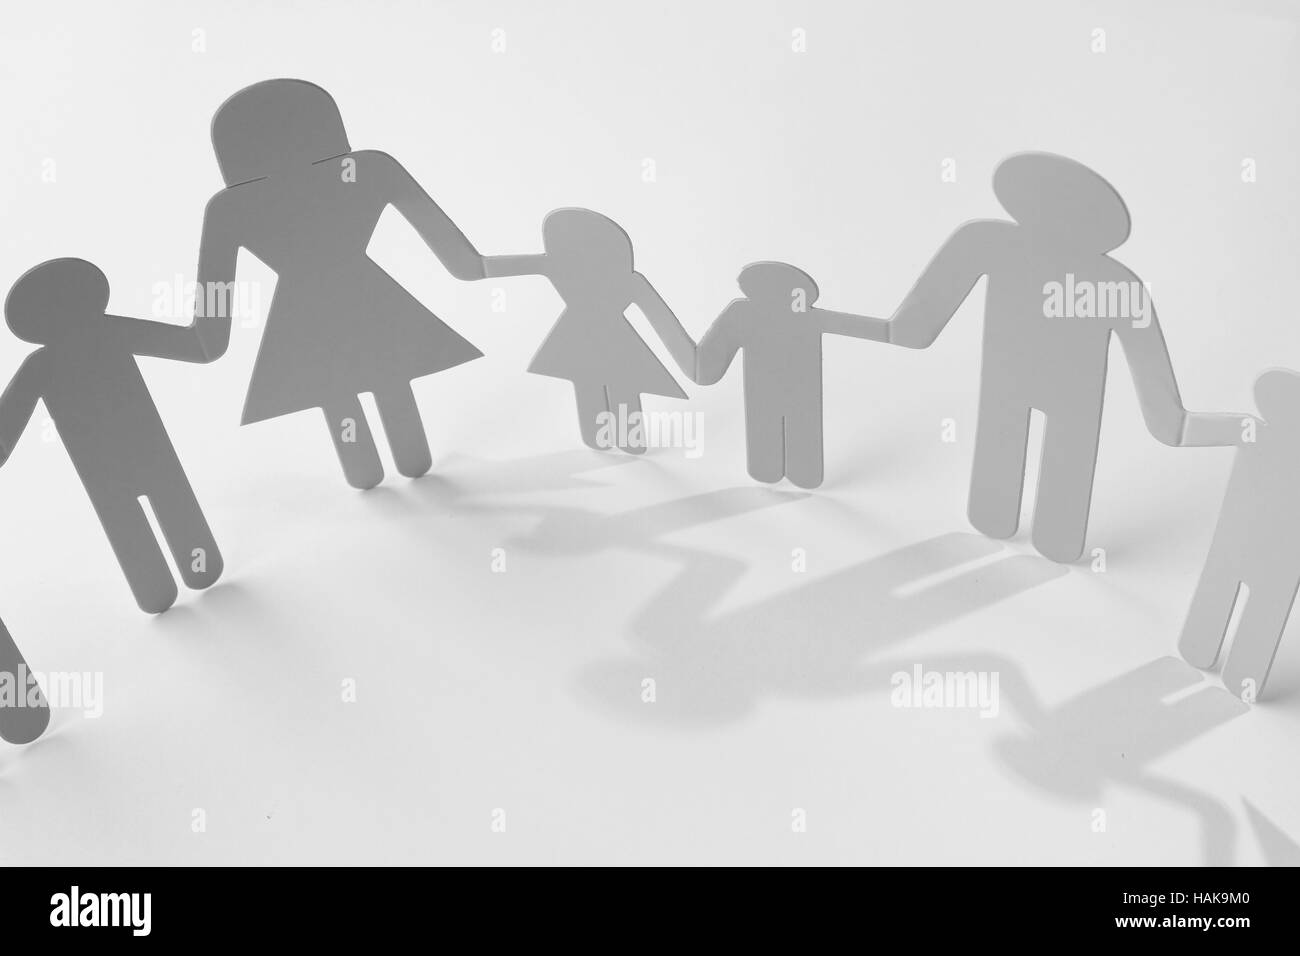 Family paper chain cutout holding hands Stock Photo